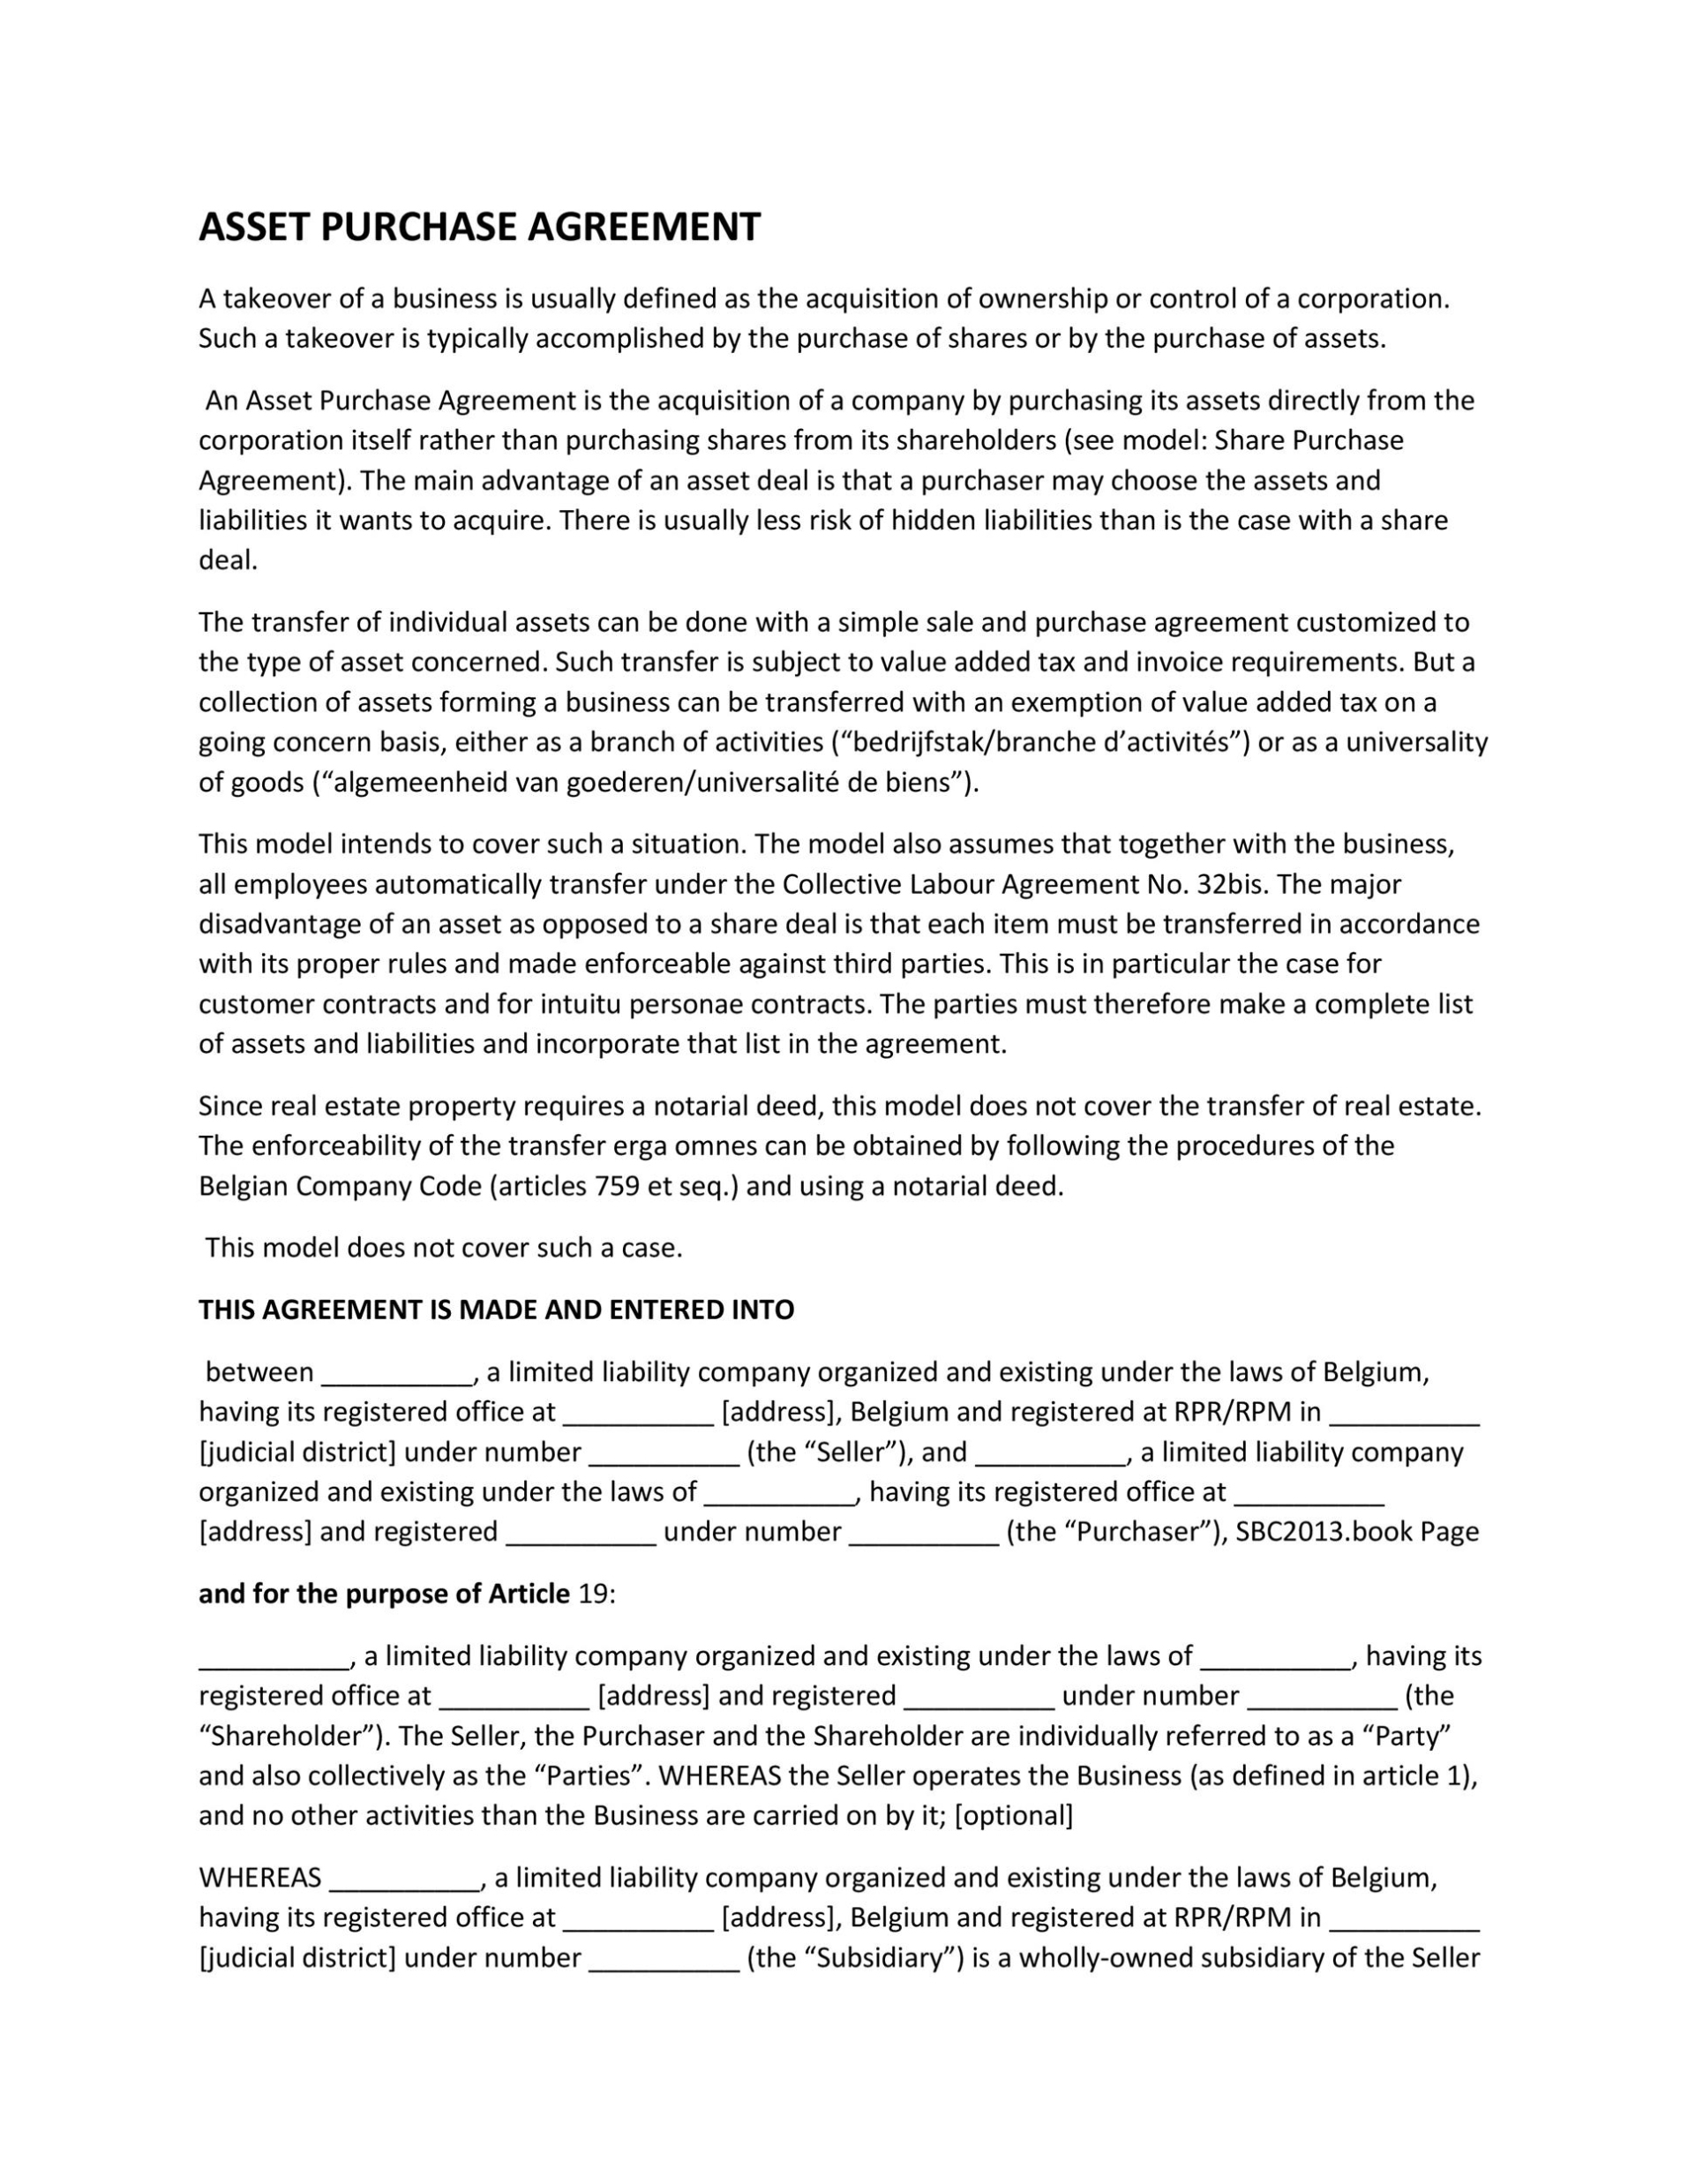 37 Simple Purchase Agreement Templates [Real Estate, Business] regarding Promise To Sell Agreement Template